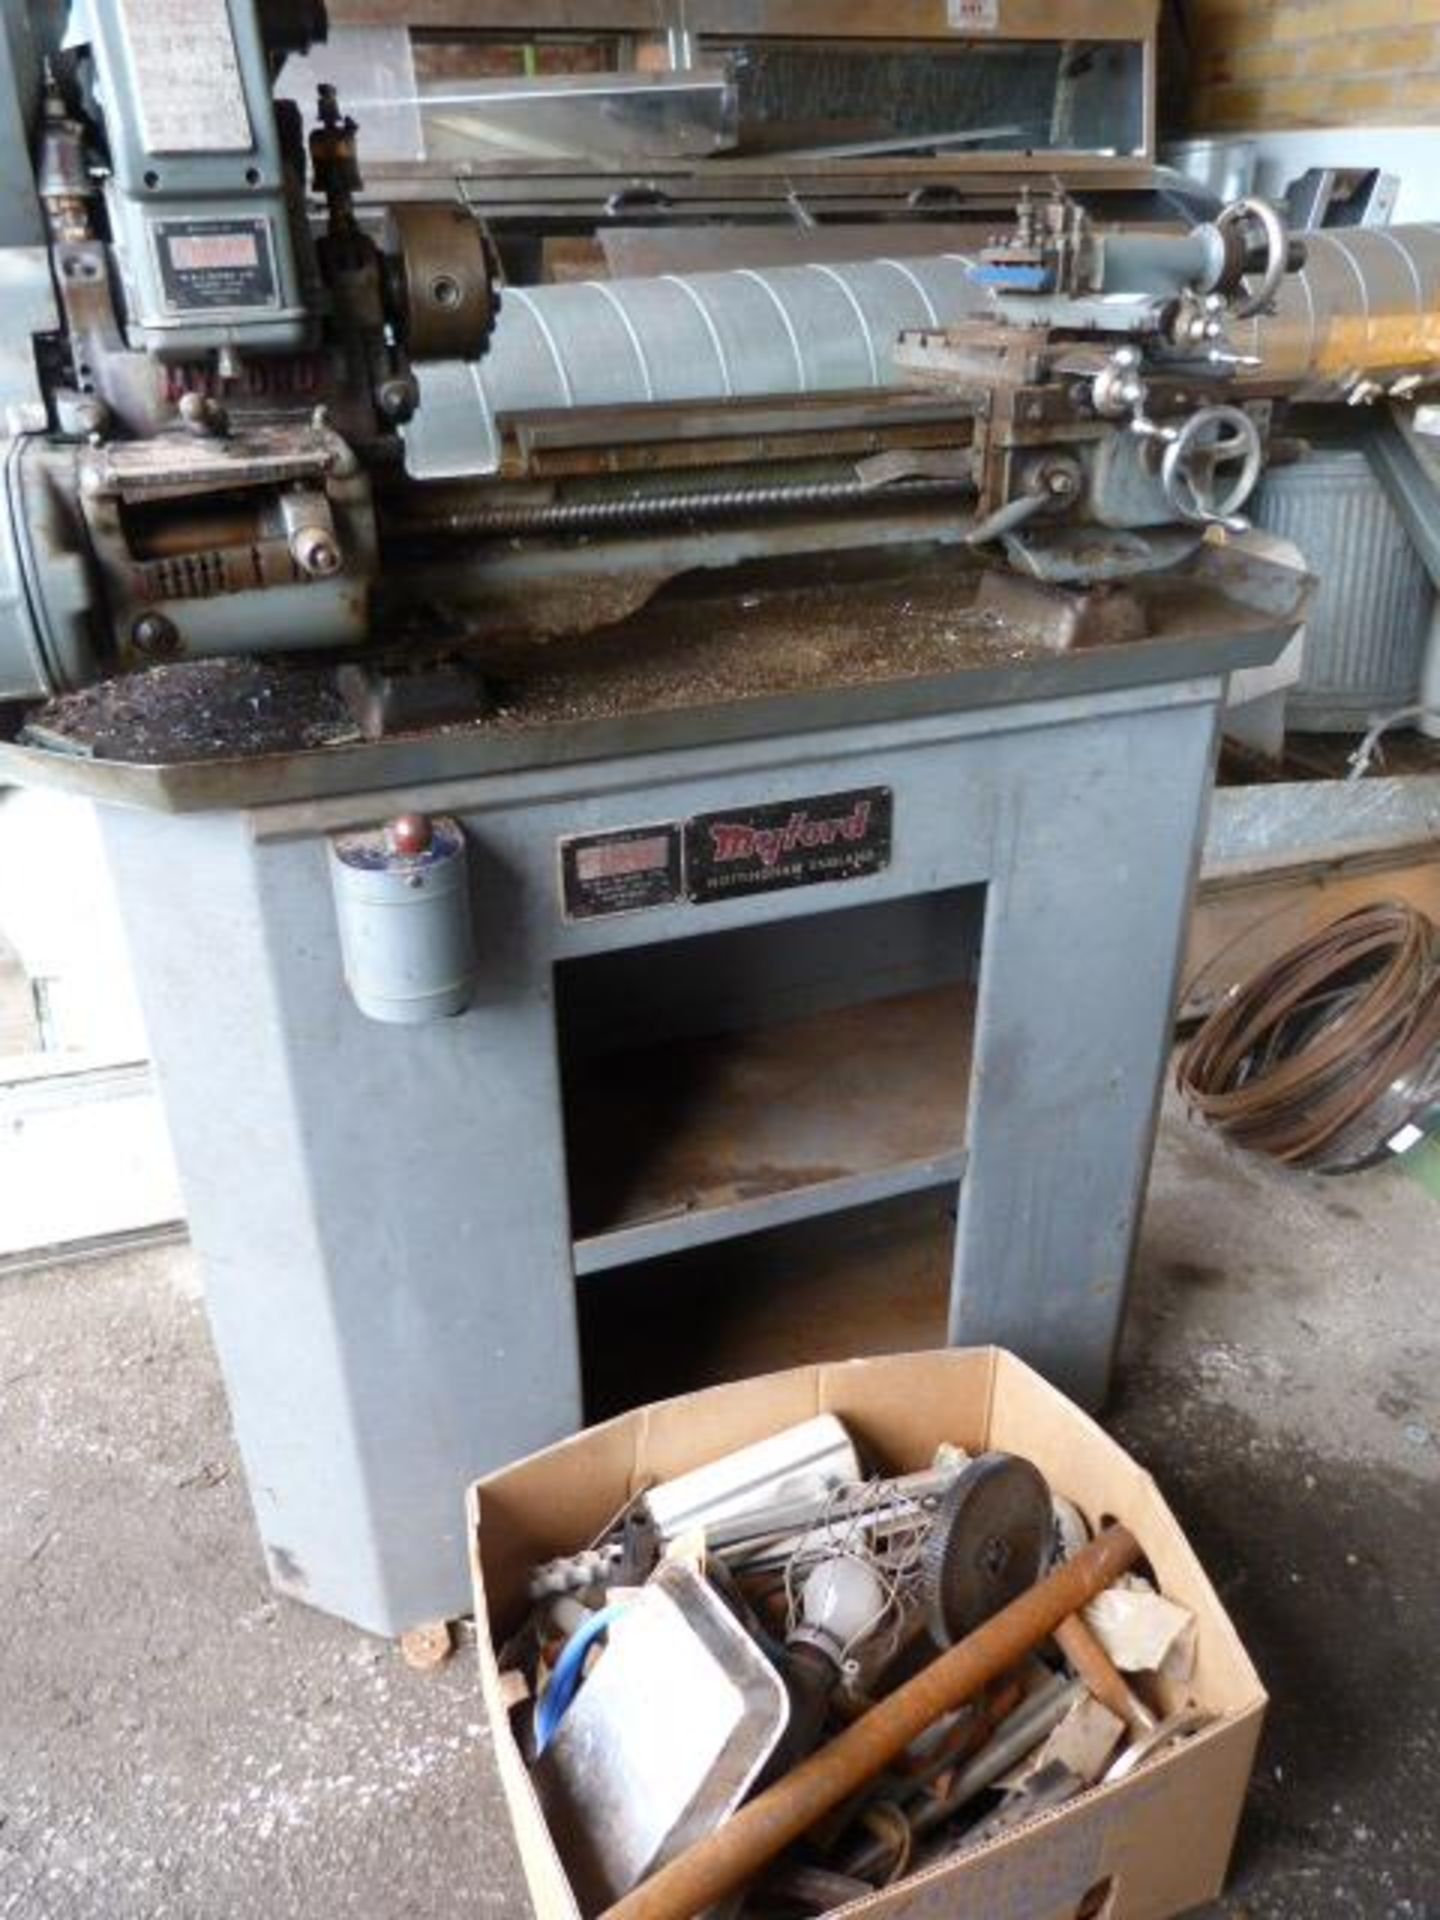 Myford Metal Lathe with Box of Associated Tools and Parts